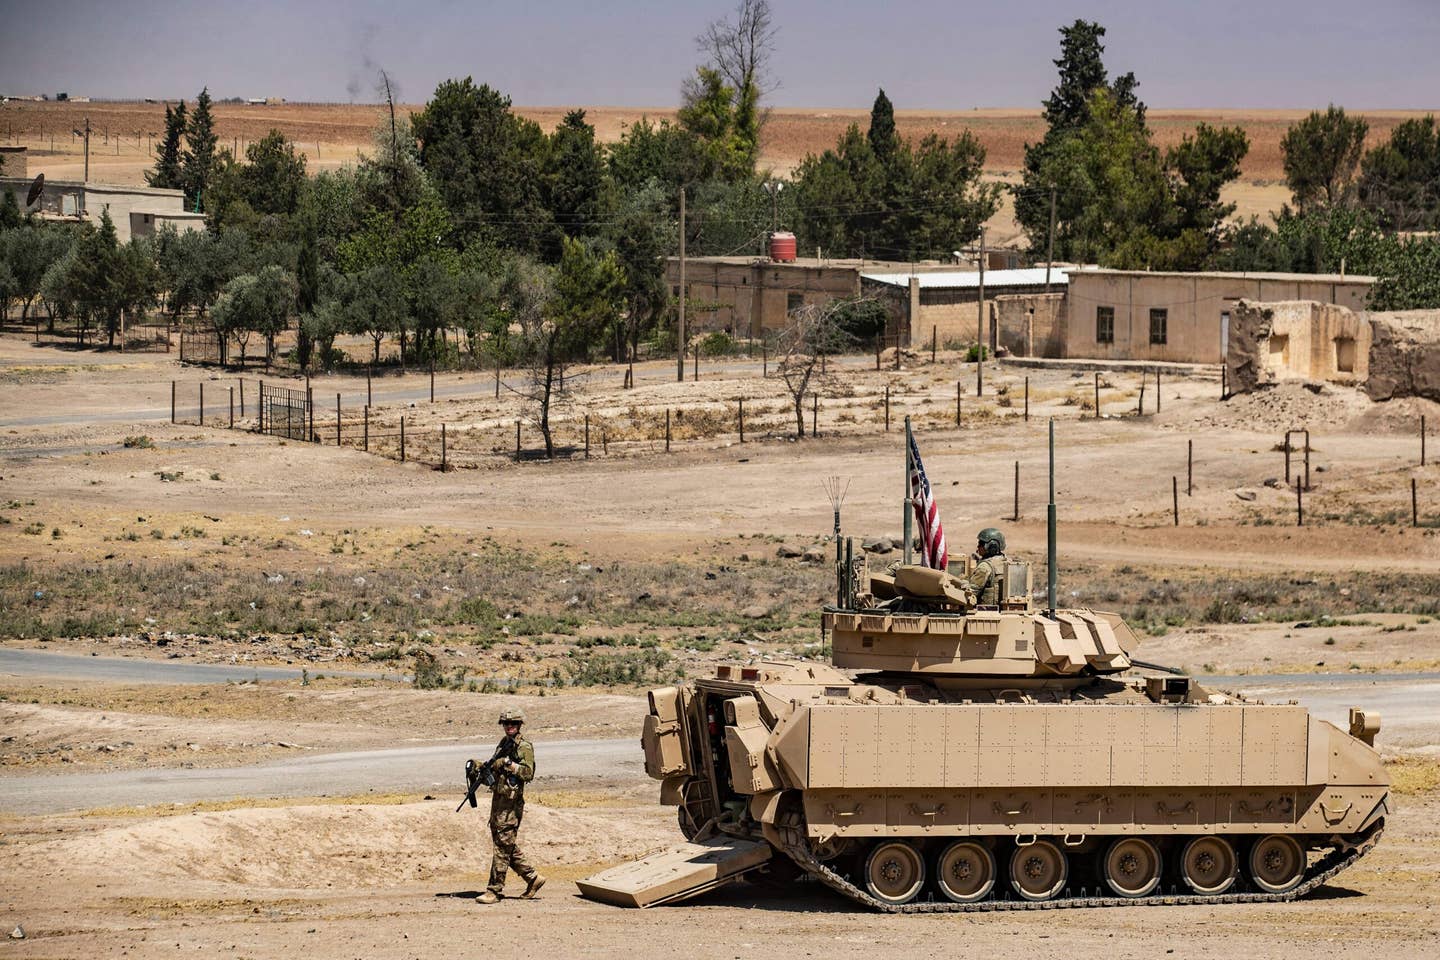 A U.S. soldier walks out of a Bradley Fighting Vehicle (BFV) during a patrol near the Rumaylan (Rmeilan) oil wells in Syria's northeastern Hasakeh province on June 22, 2021. (Photo by Delil SOULEIMAN / AFP) (Photo by DELIL SOULEIMAN/AFP via Getty Images)